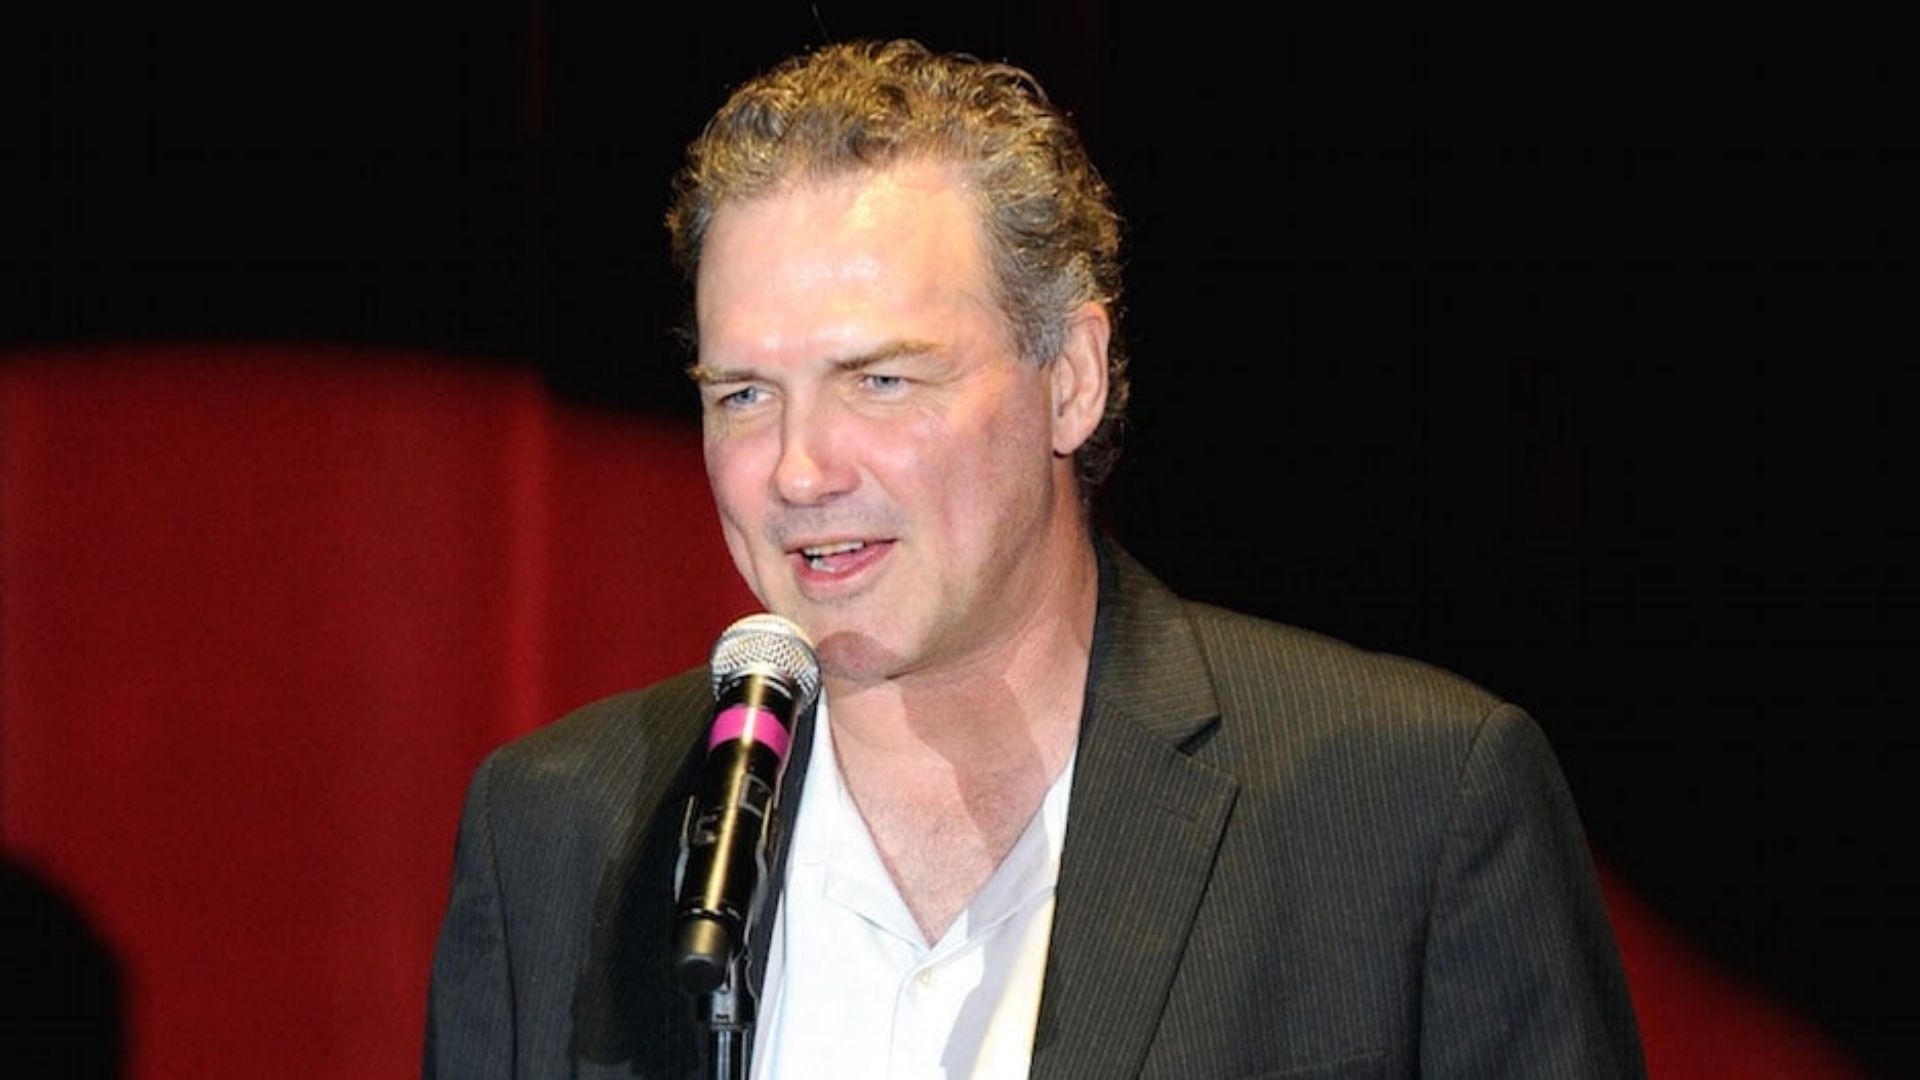 Posthumous Norm Macdonald comedy special on Netflix 'He left this gift'